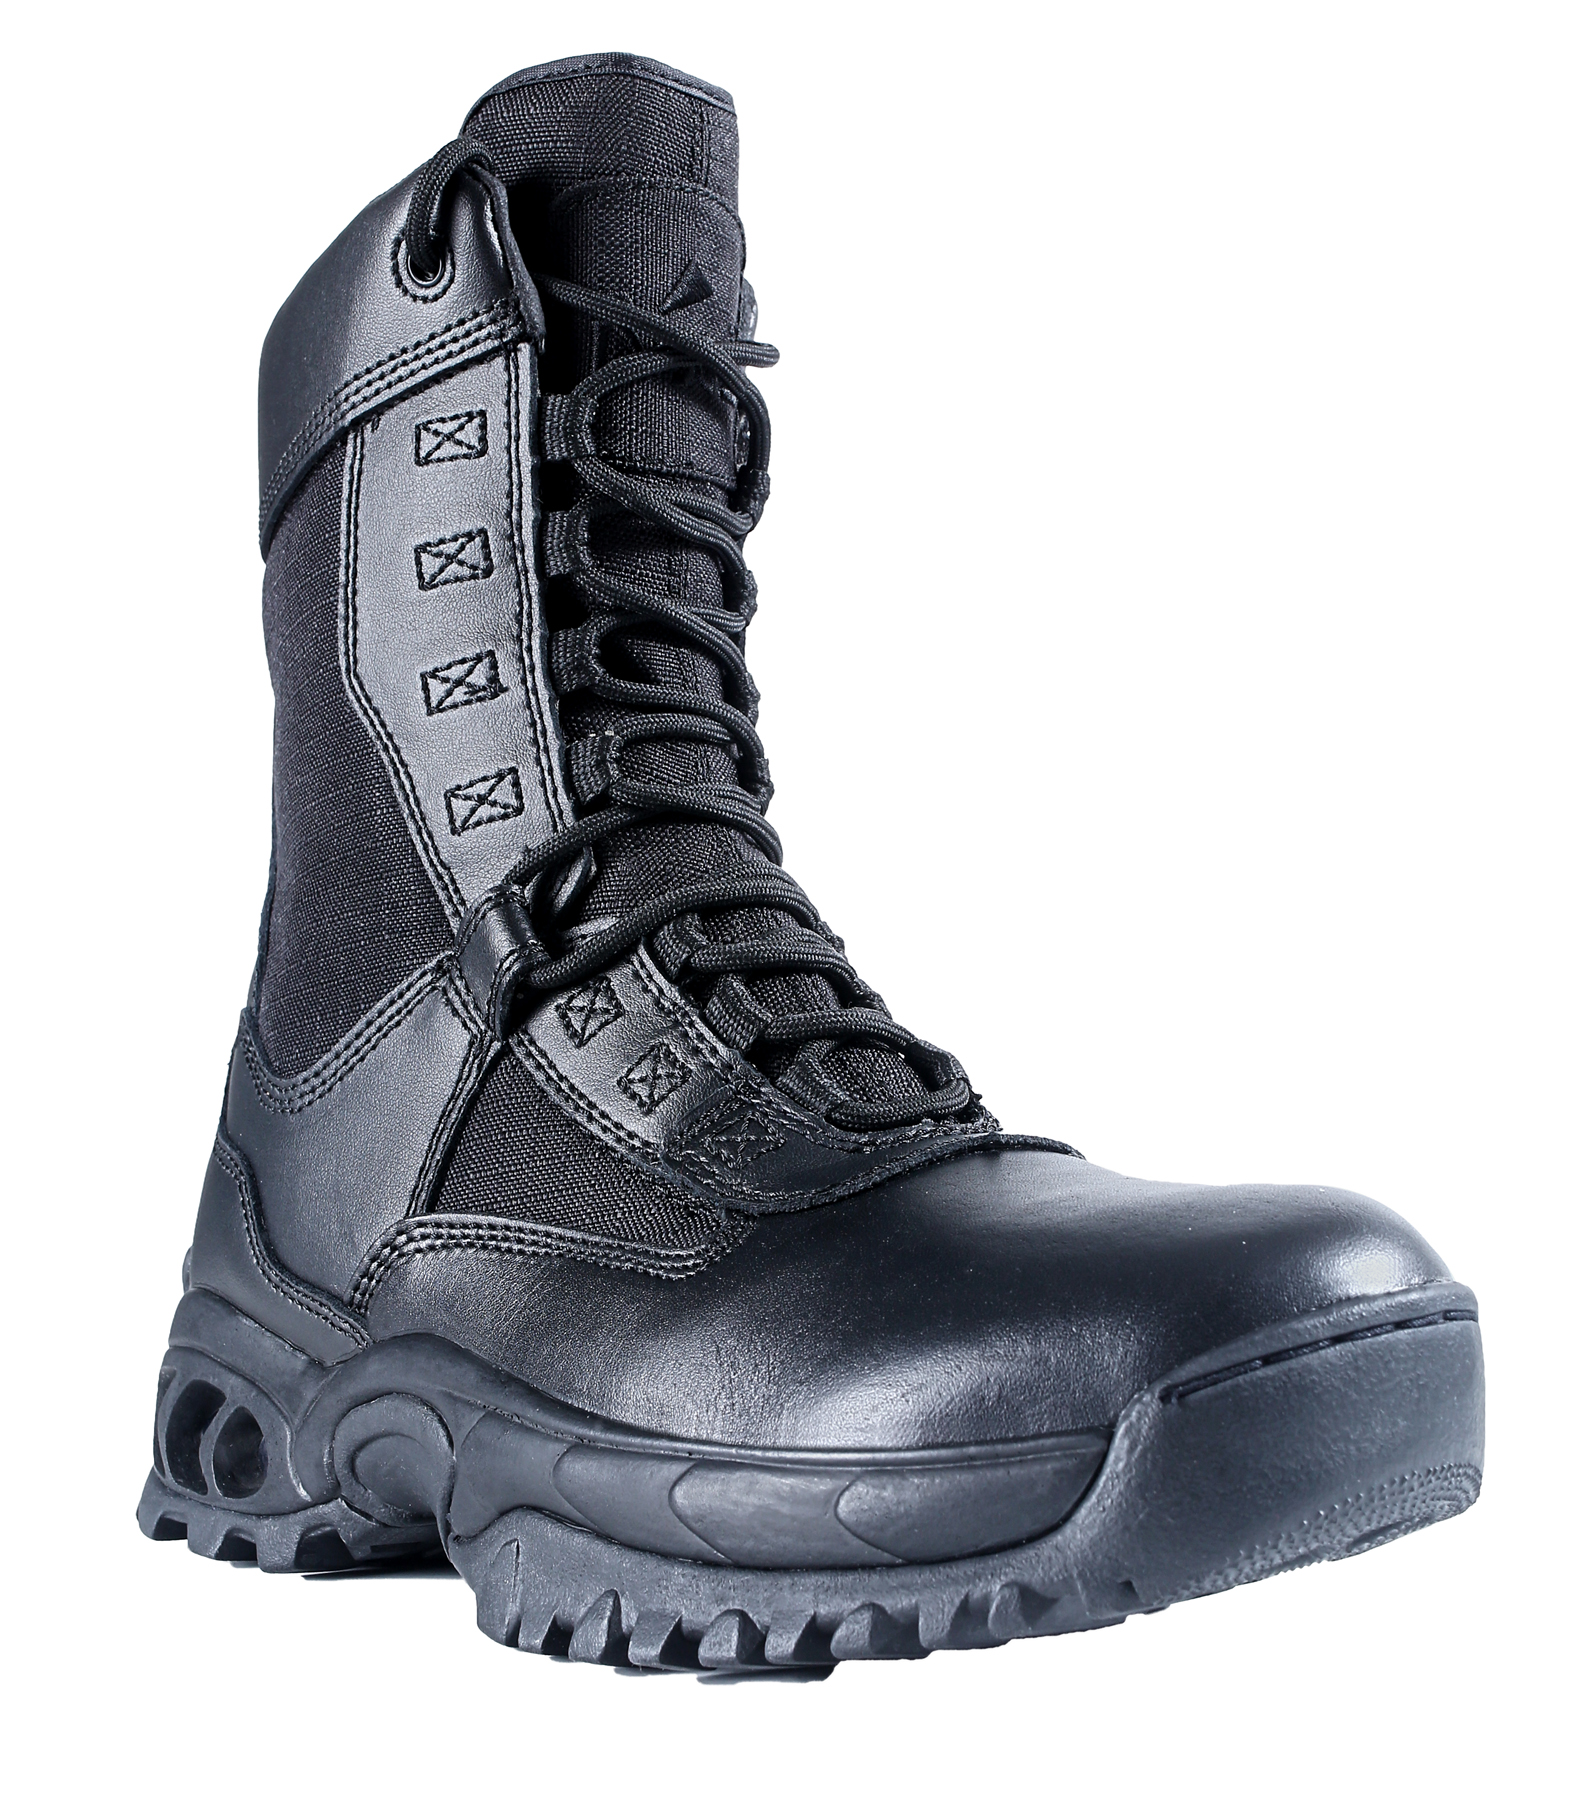 Ridge Footwear Men's 8" Air-Tac Ghost Zipper Leather Soft Toe Tactical Boot 08010 Wide Width Available - Black